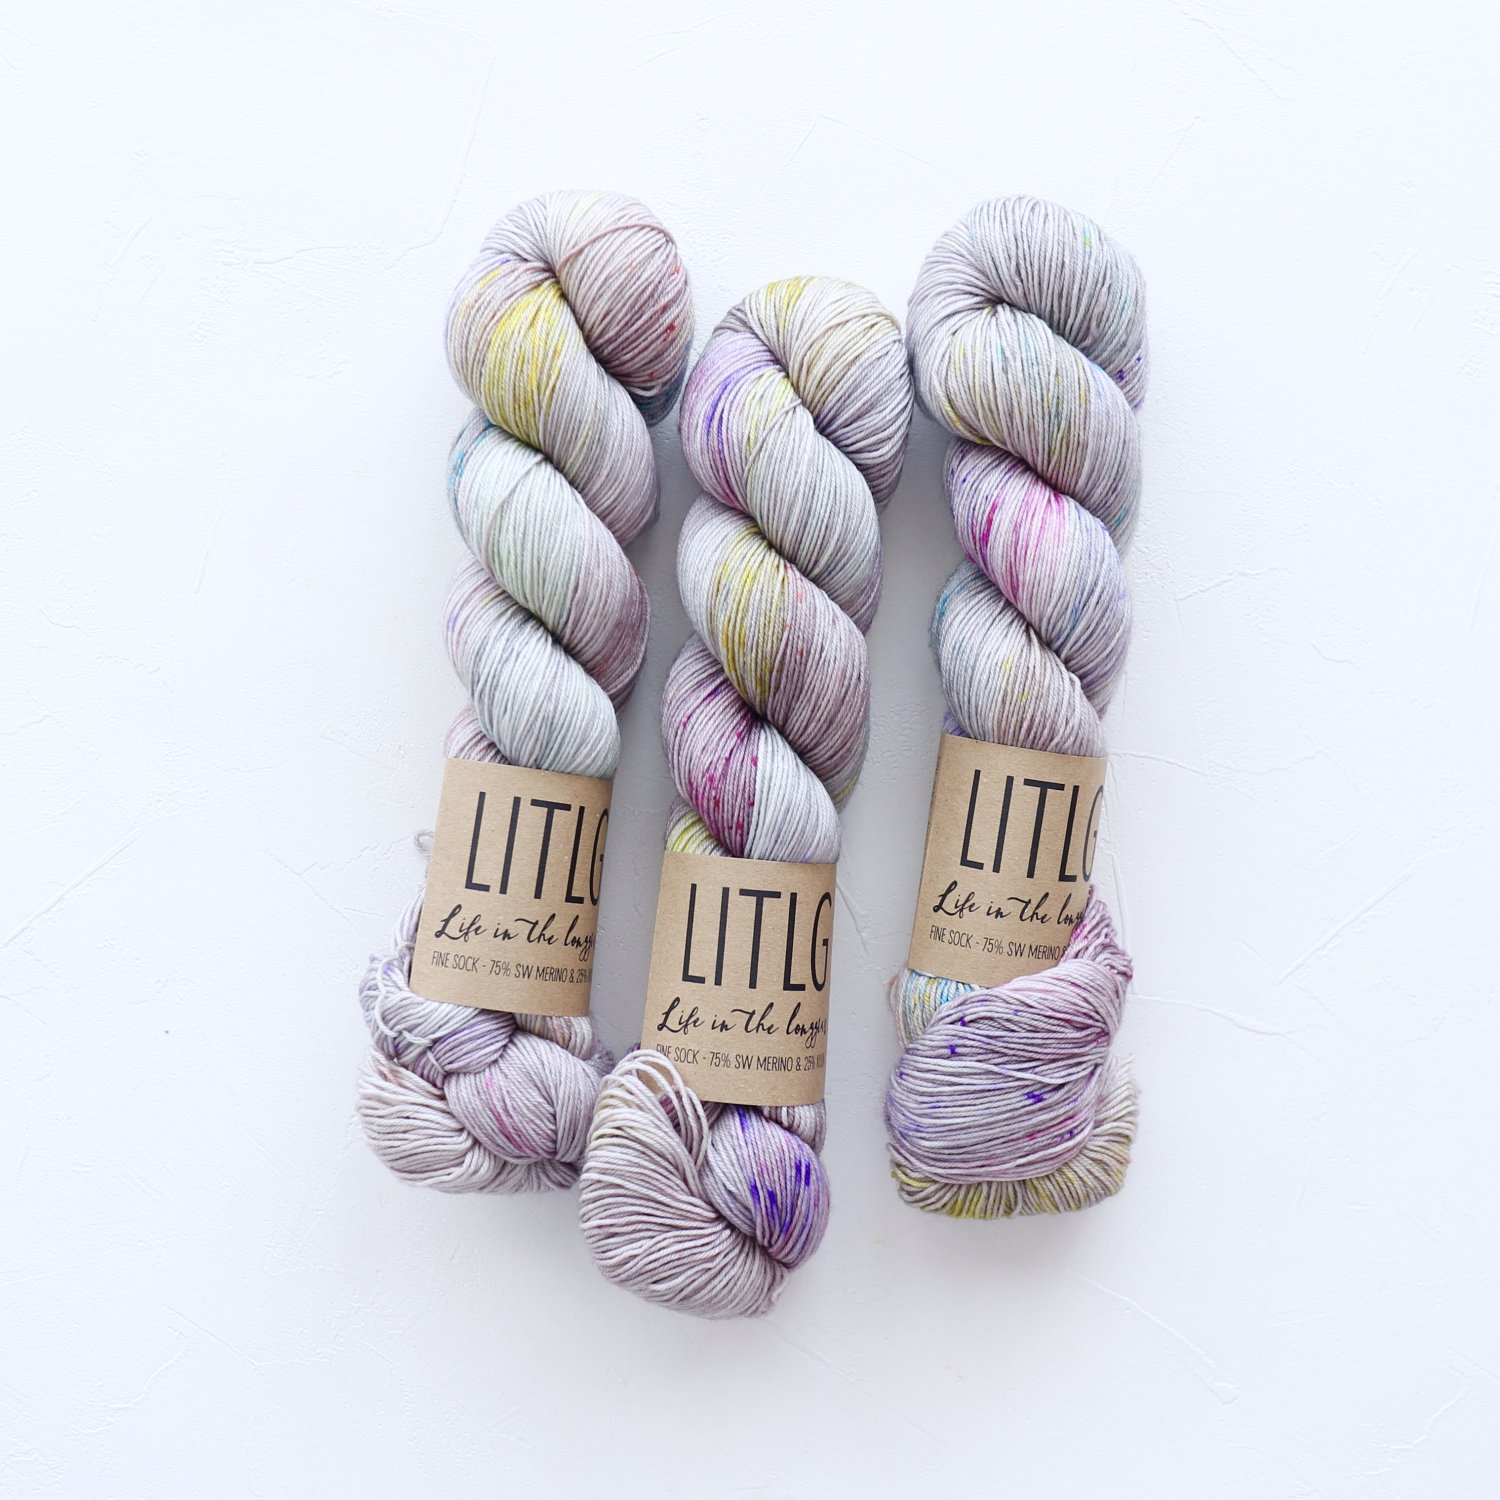 【LIFE IN THE LONGGRASS】<br>Fine Sock<br>Moonbow